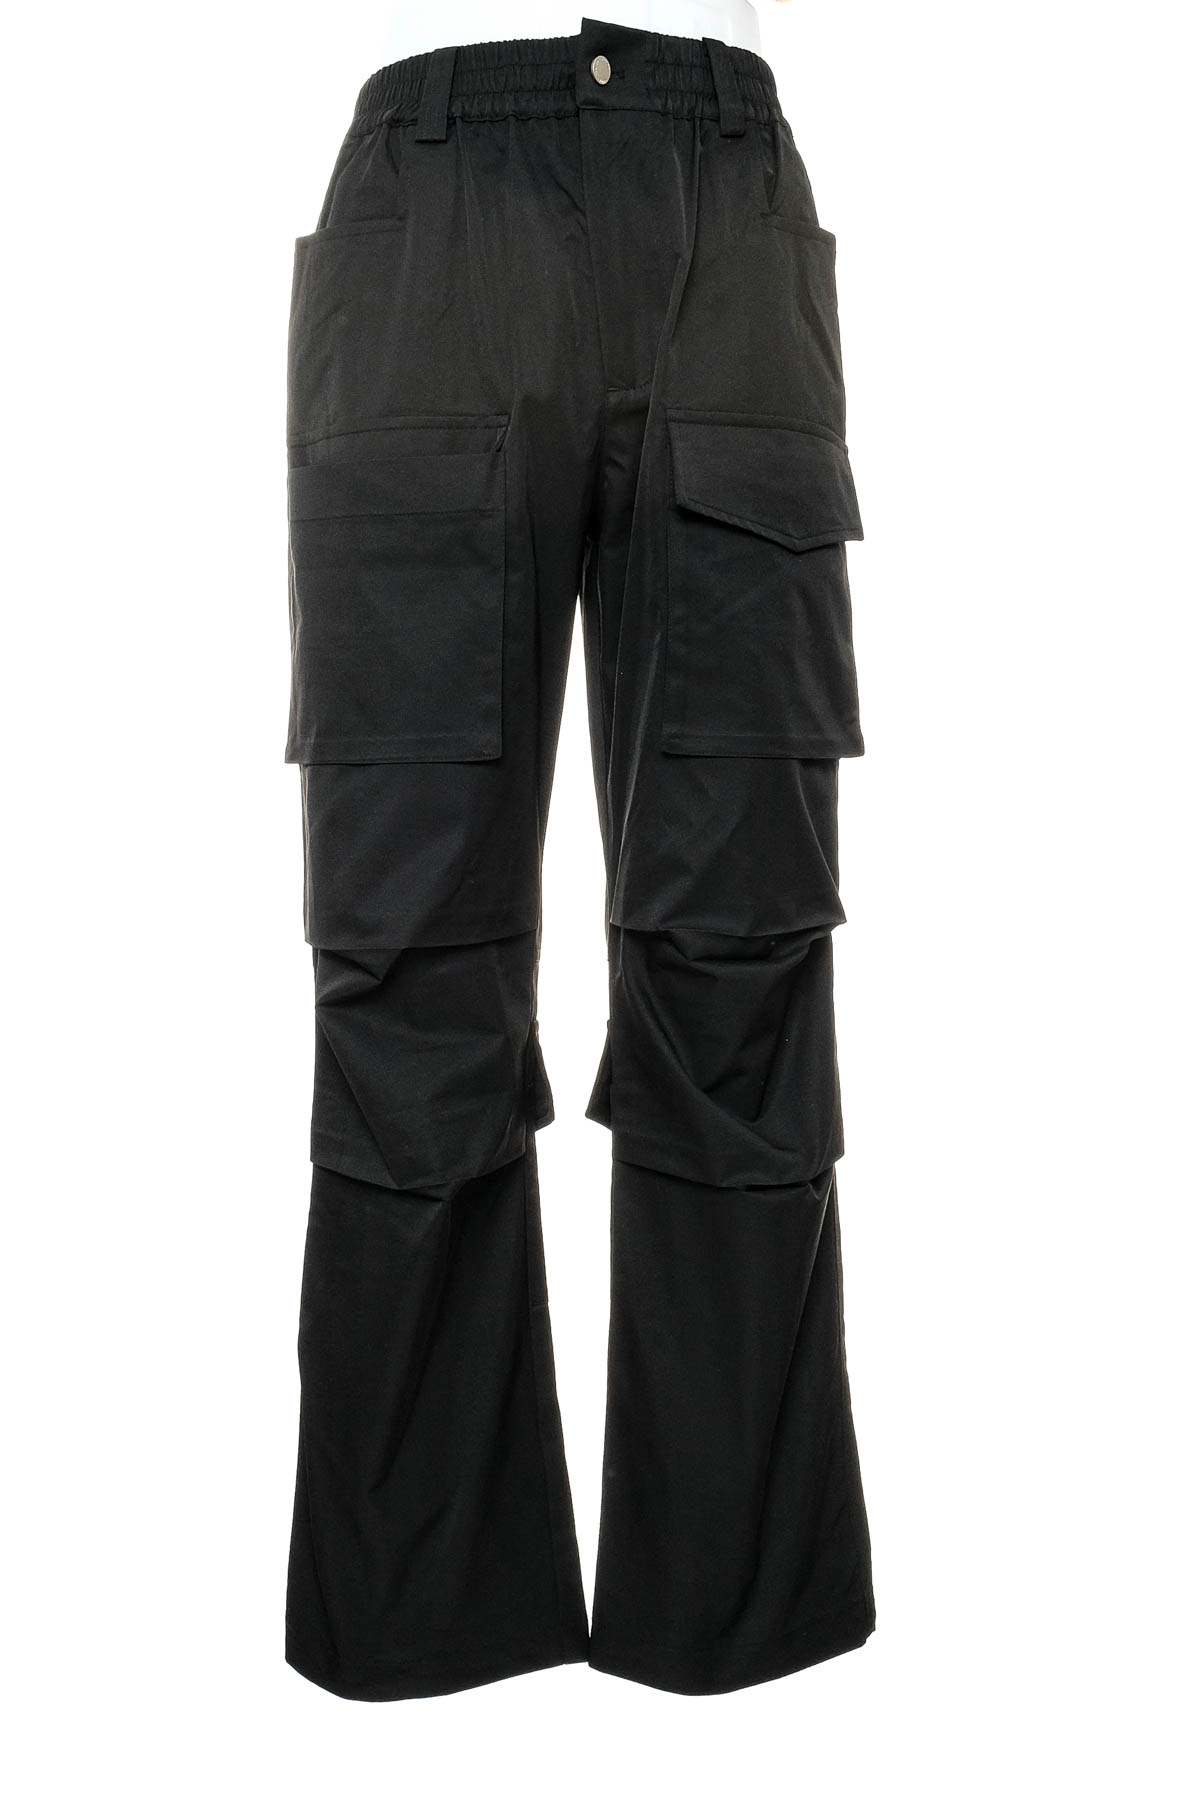 Men's trousers - Undefined - 0